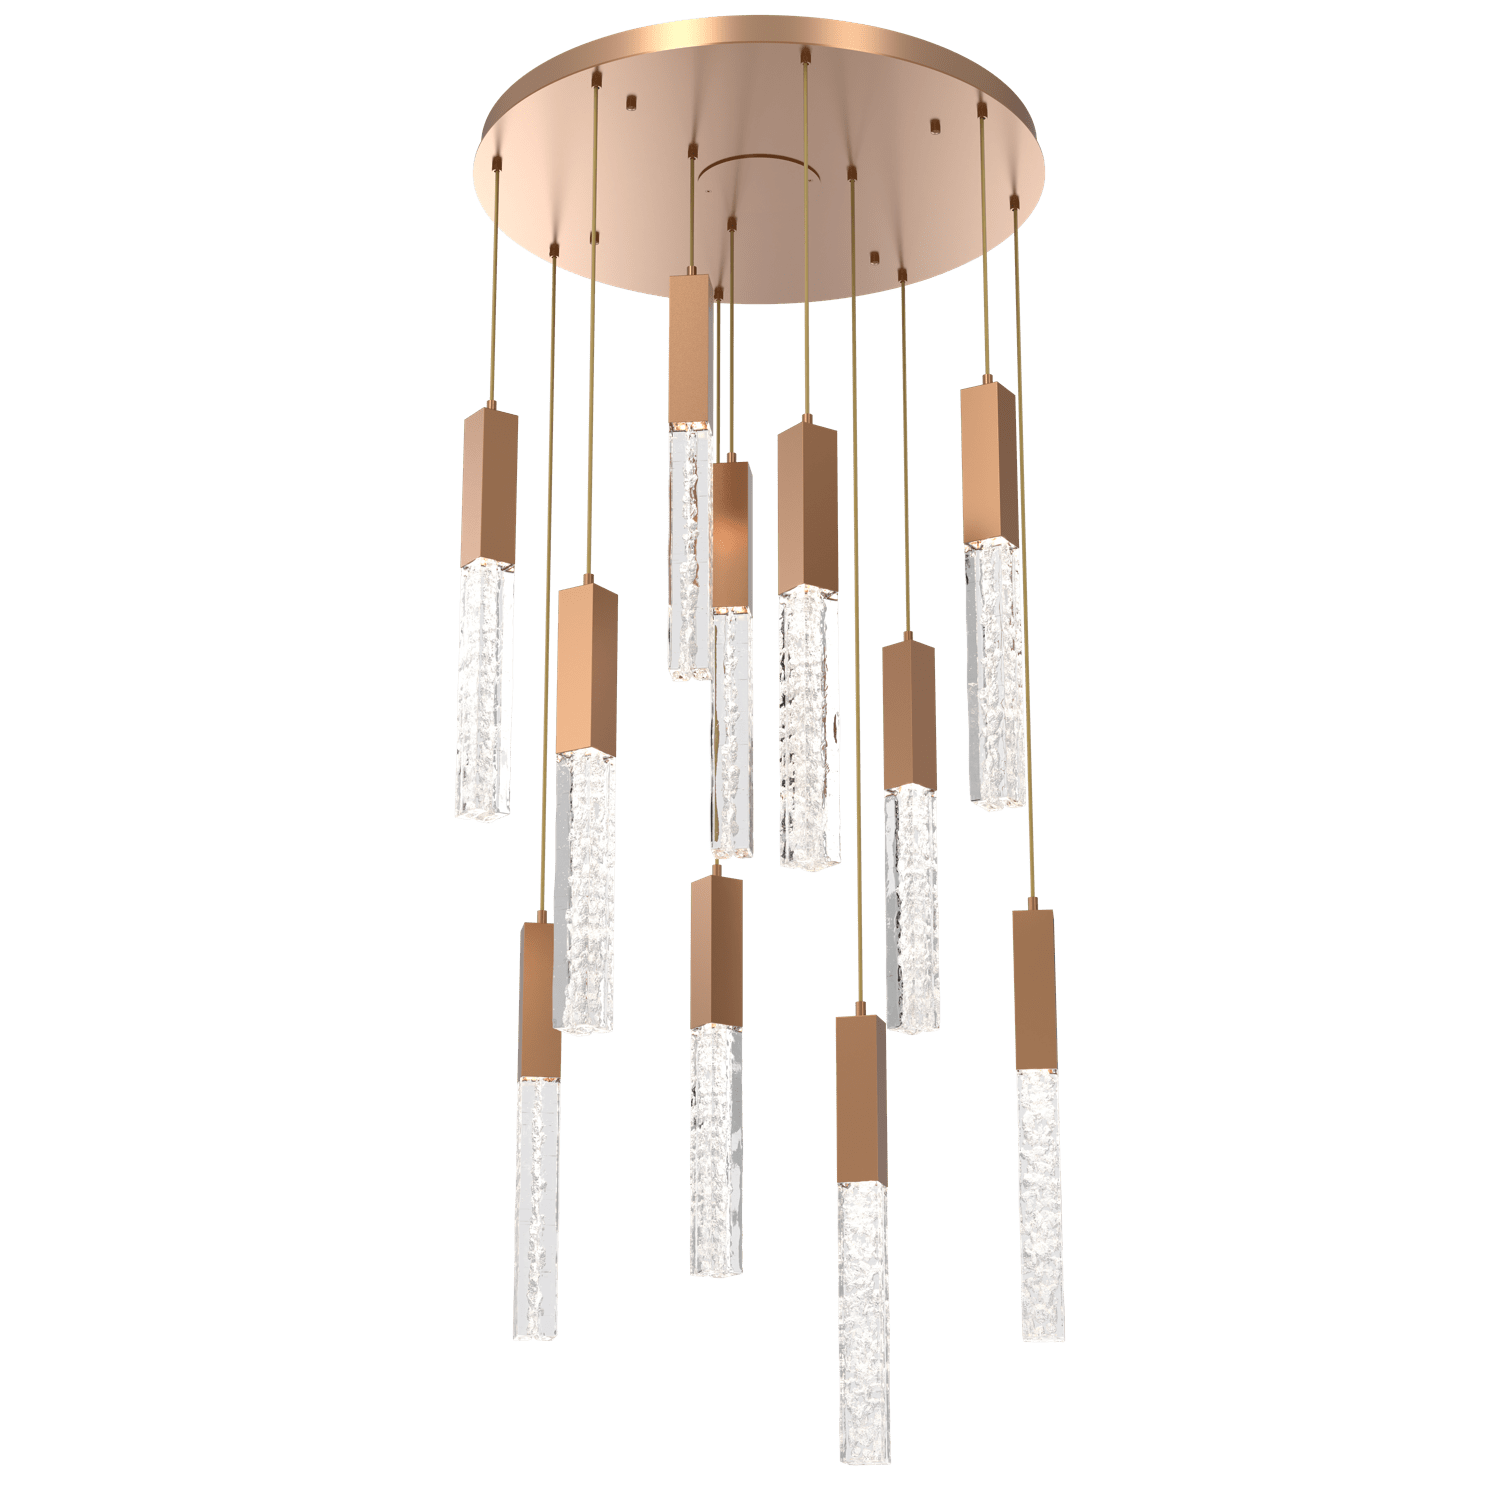 CHB0060-11-NB-GC-Hammerton-Studio-Axis-11-Light-Pendant-Chandelier-with-Novel-Brass-finish-and-clear-cast-glass-and-LED-lamping